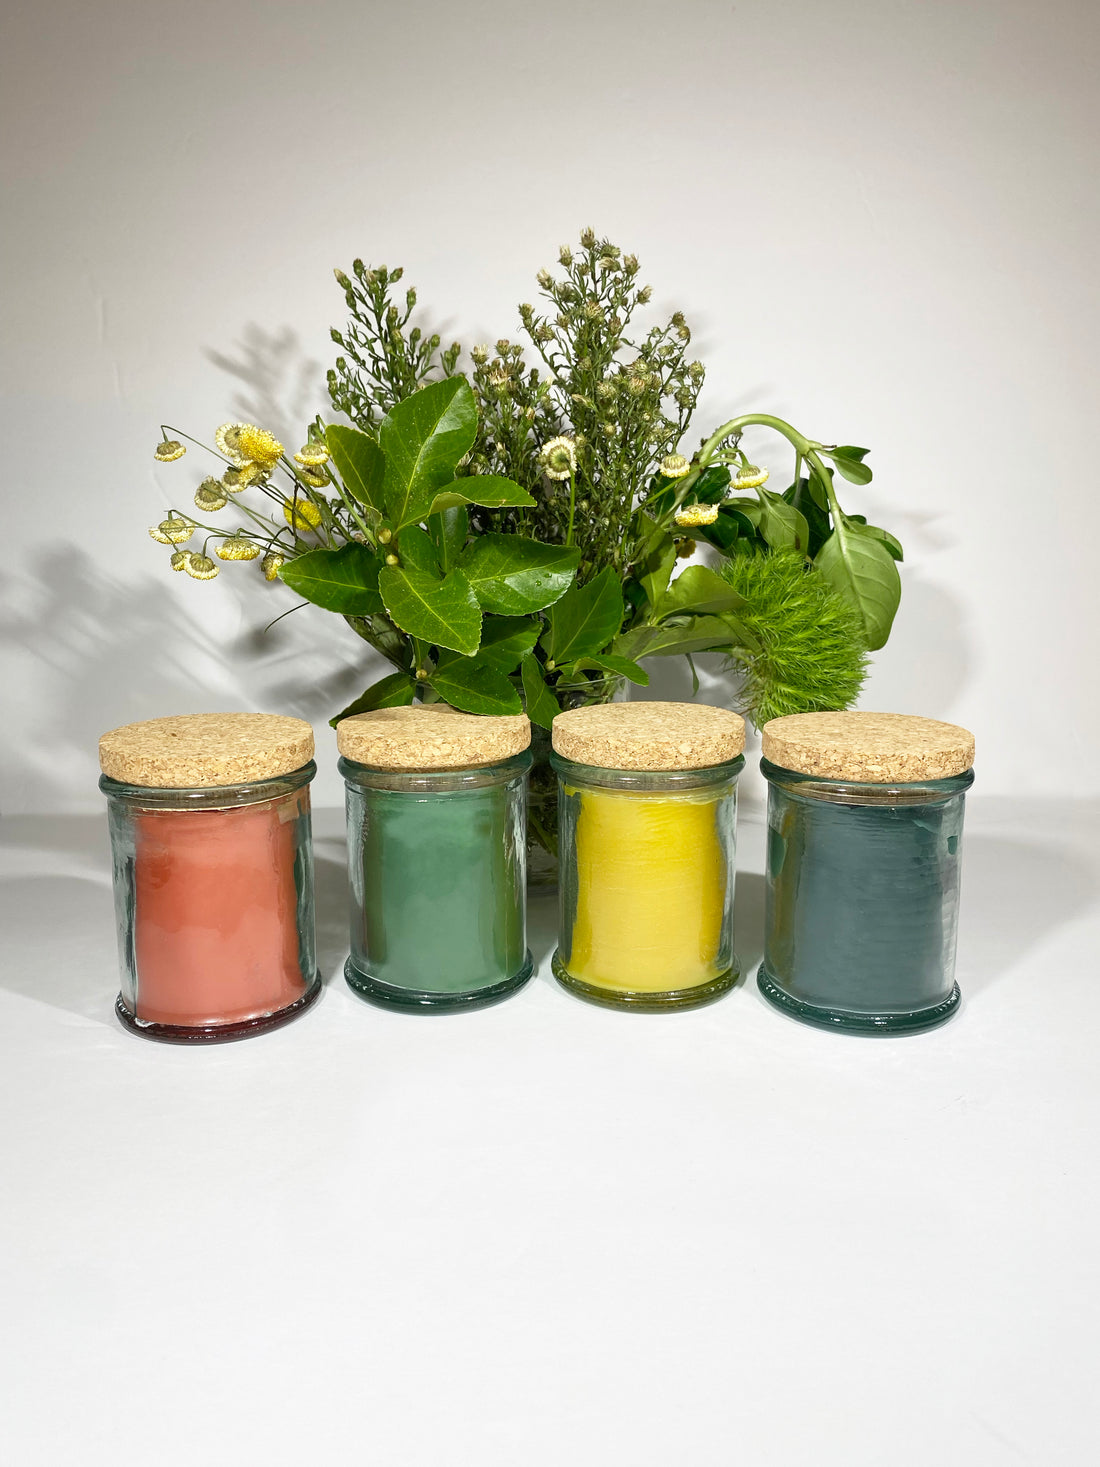 Introducing our Beeswax Candle Collection!